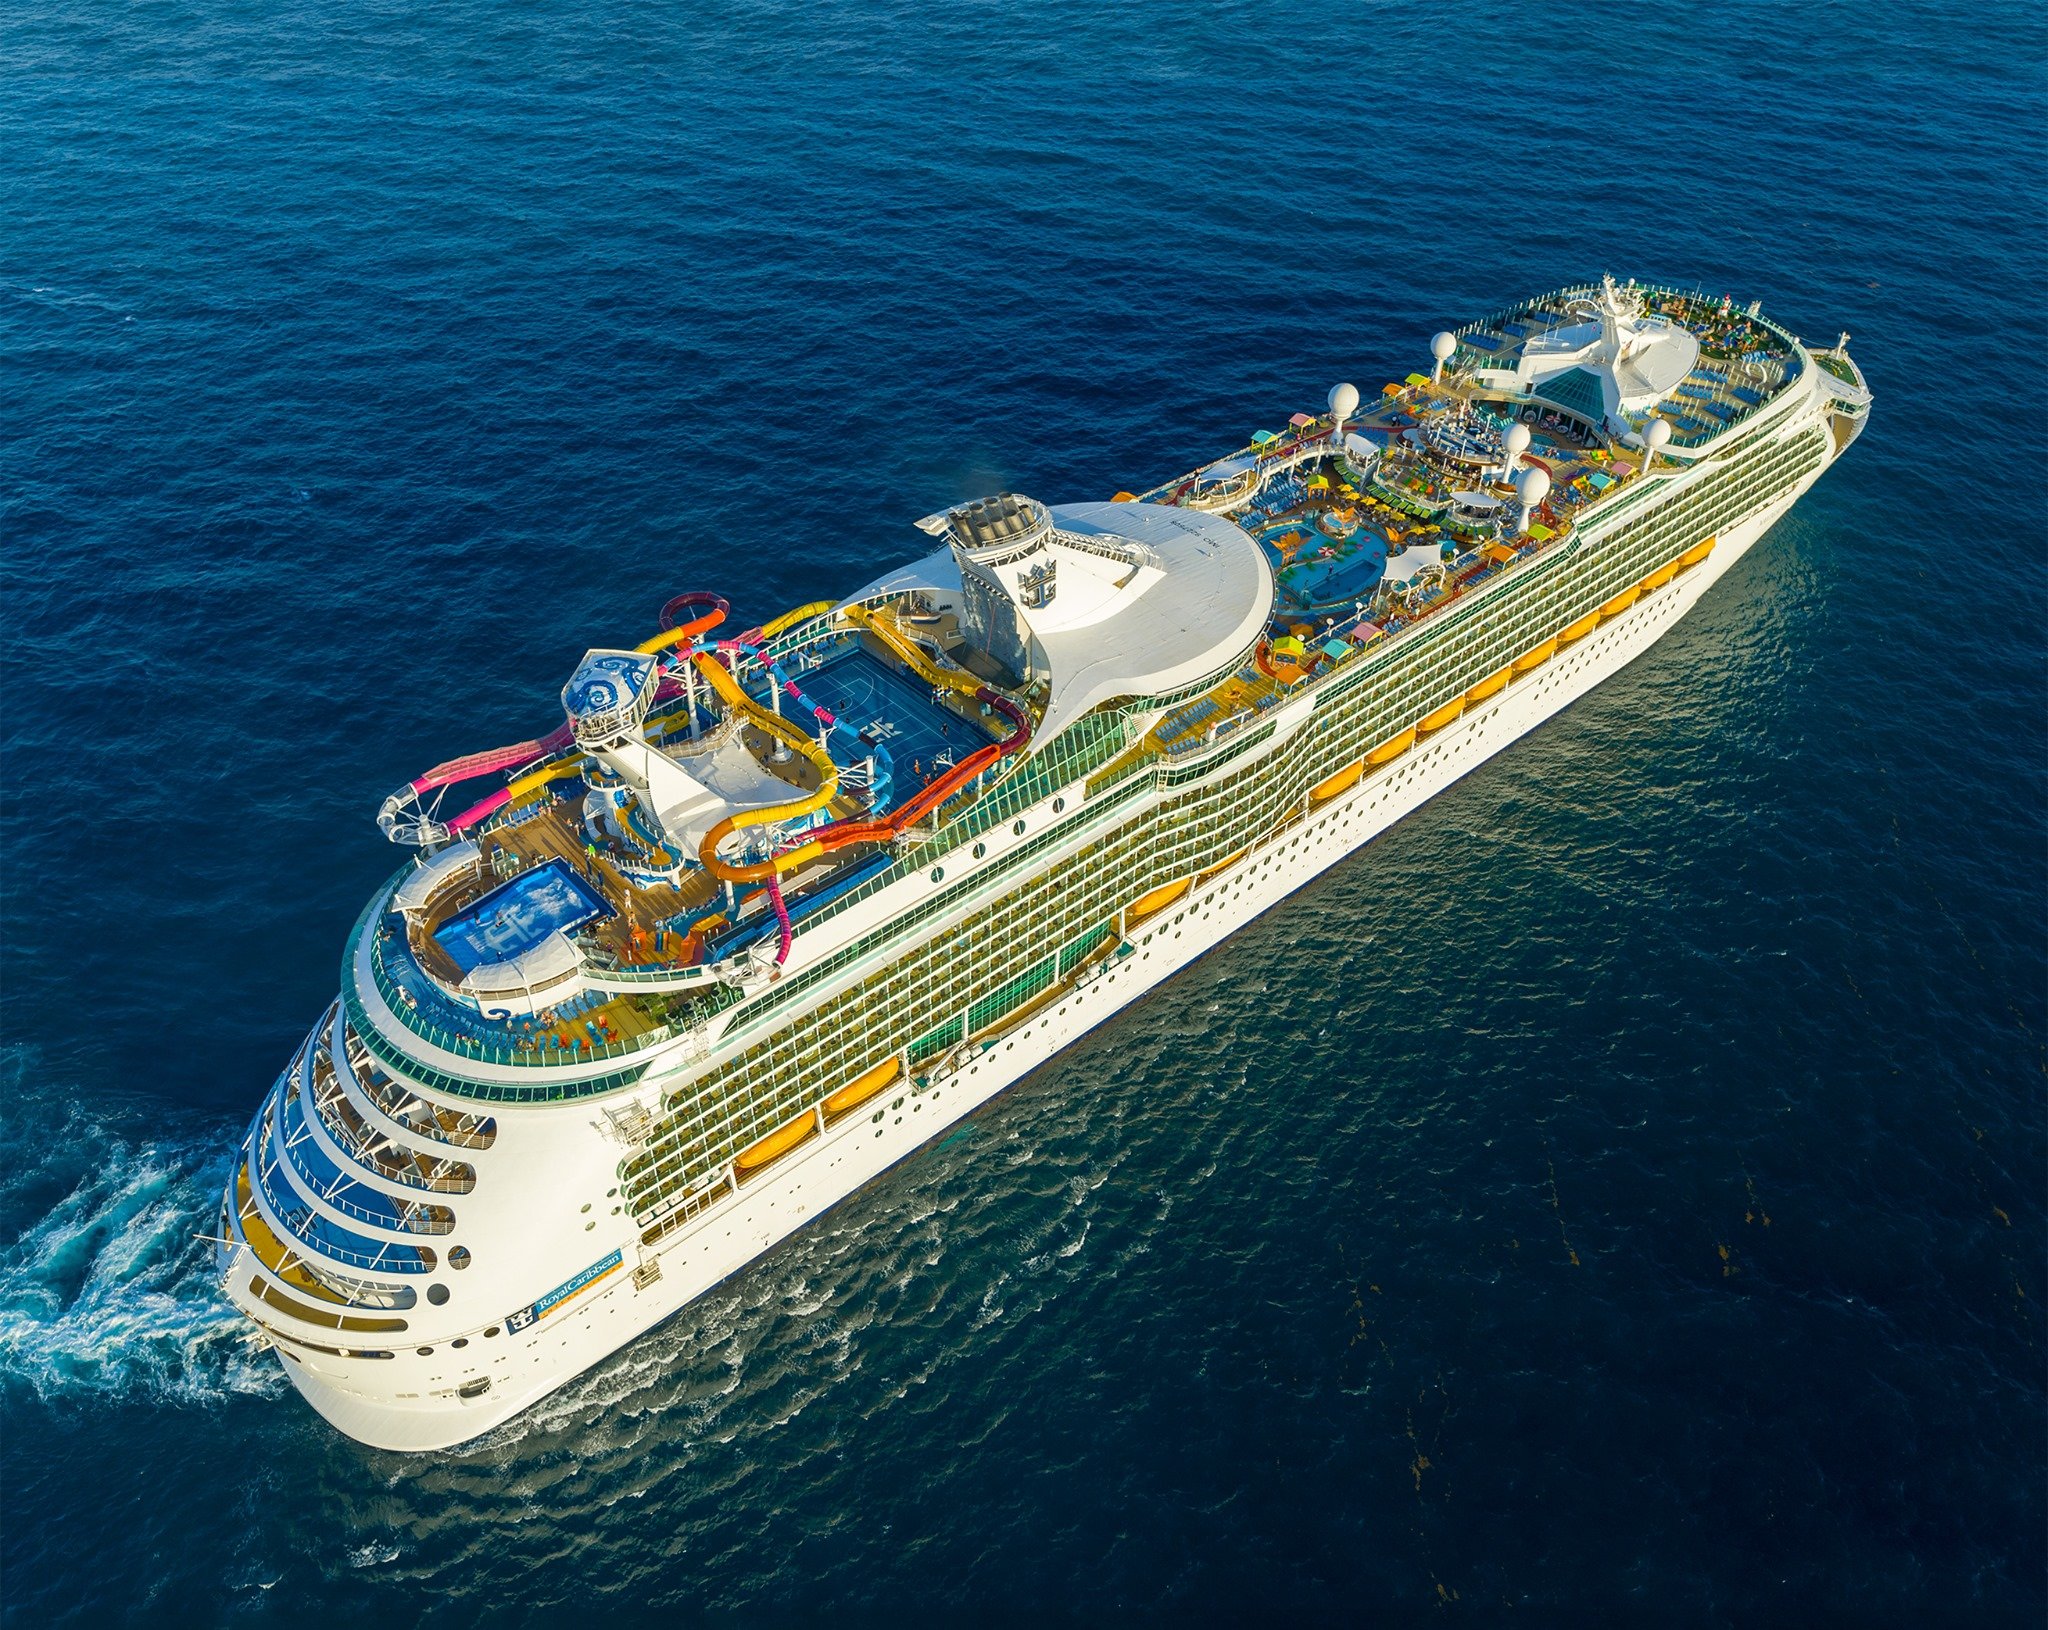 Spotted: Royal Caribbean ship scheduled to sail from Los Angeles, California in 2021 | Royal Caribbean Blog